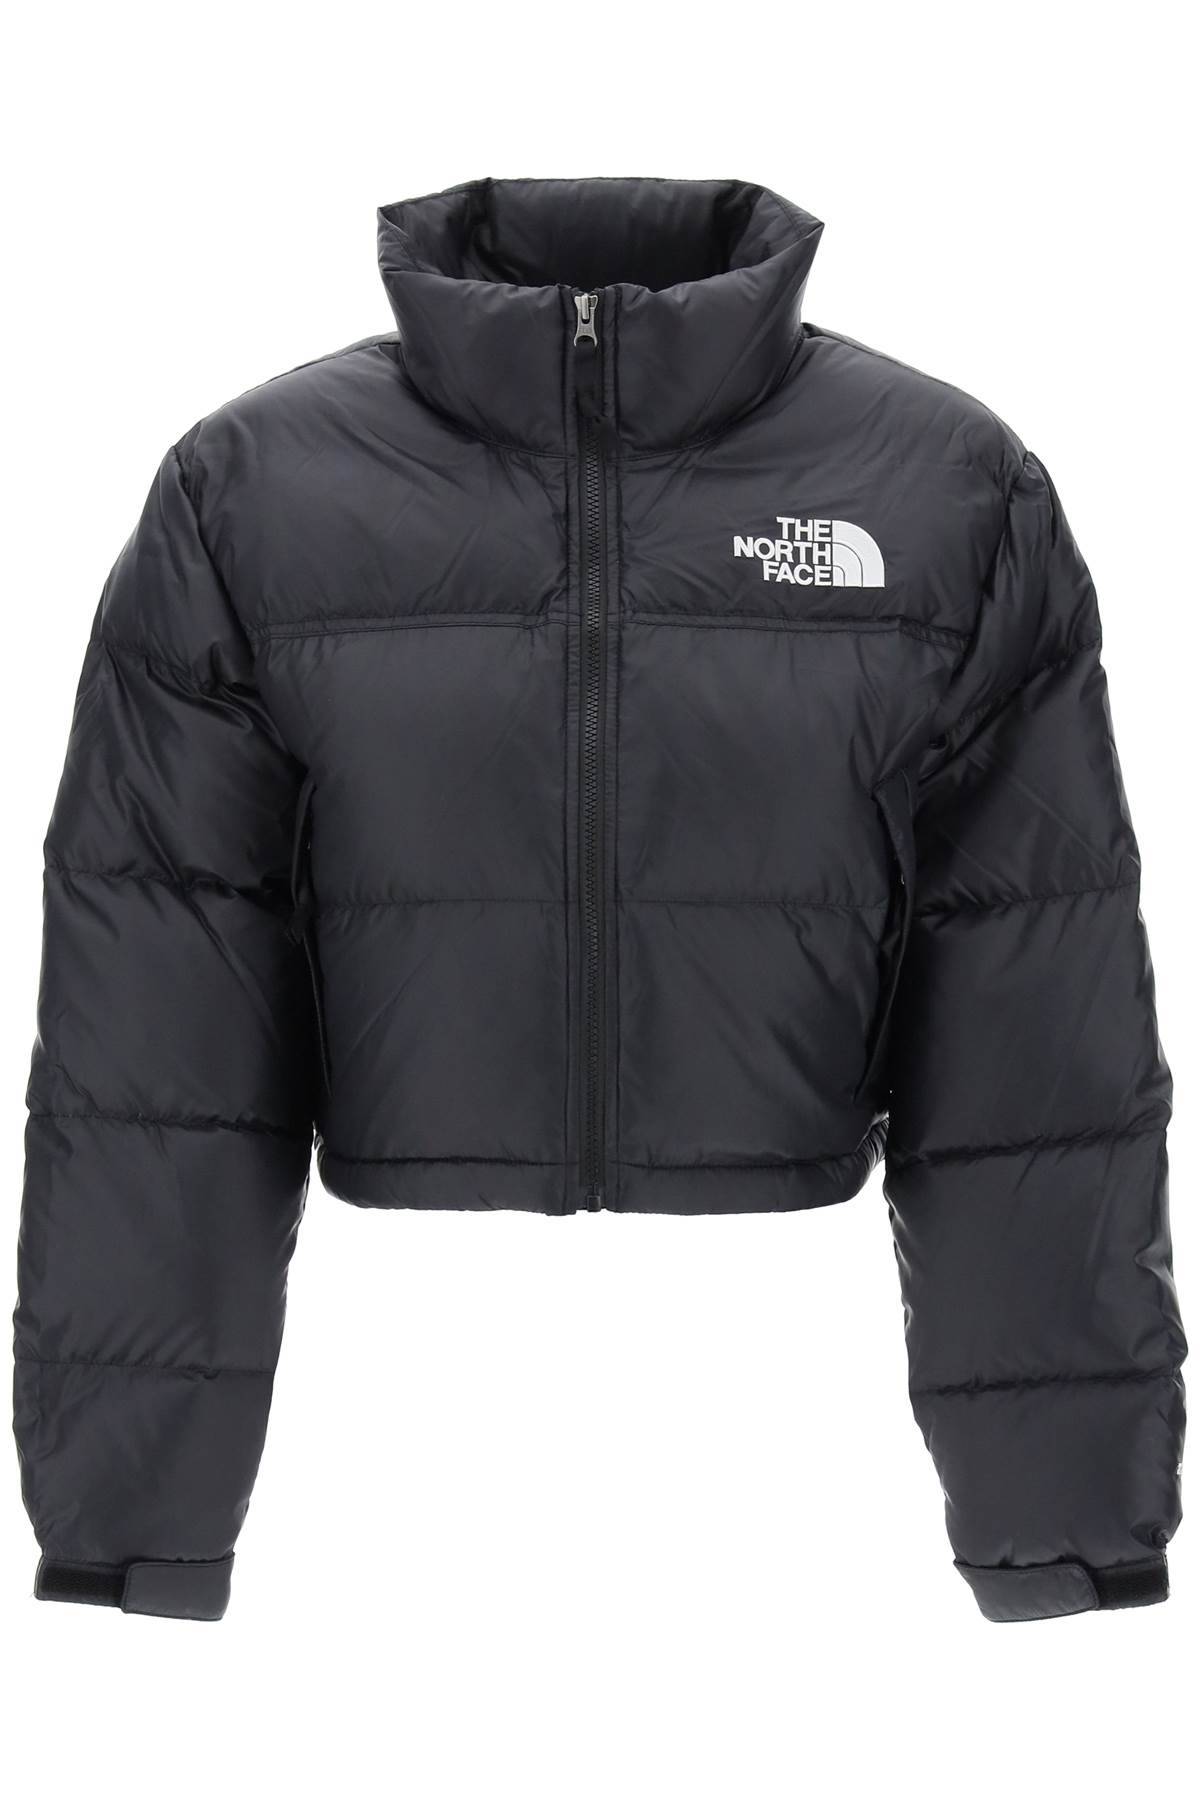 The North Face THE NORTH FACE cropped nuptse